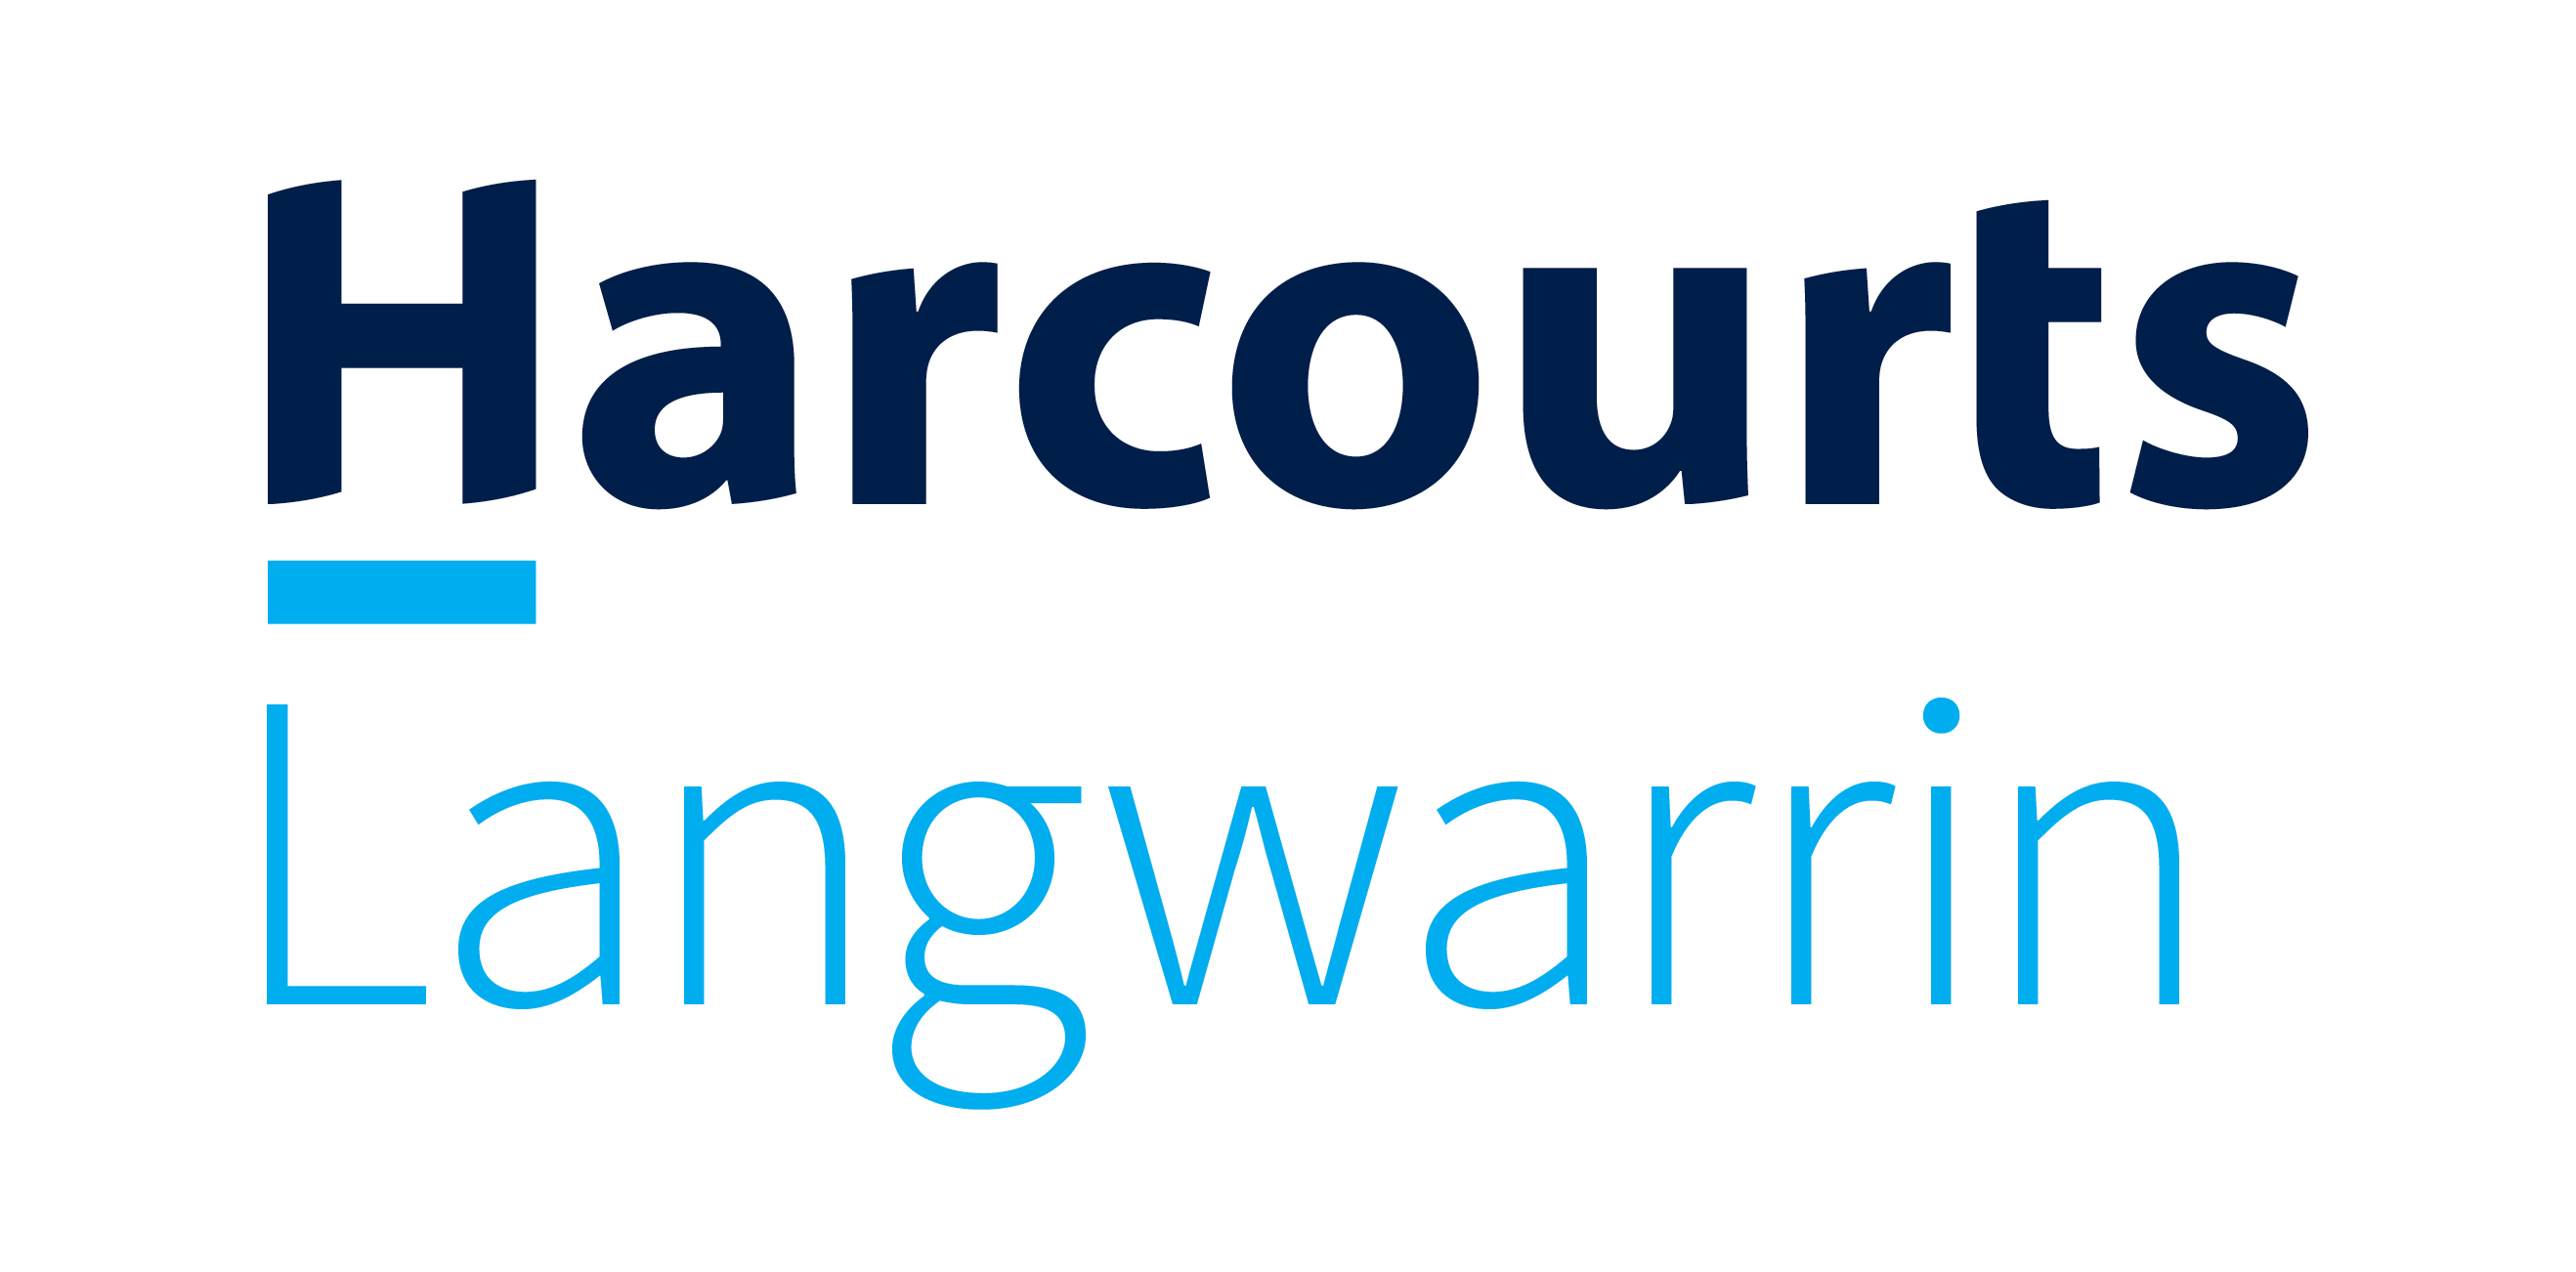 Real Estate Agency Harcourts - Langwarrin